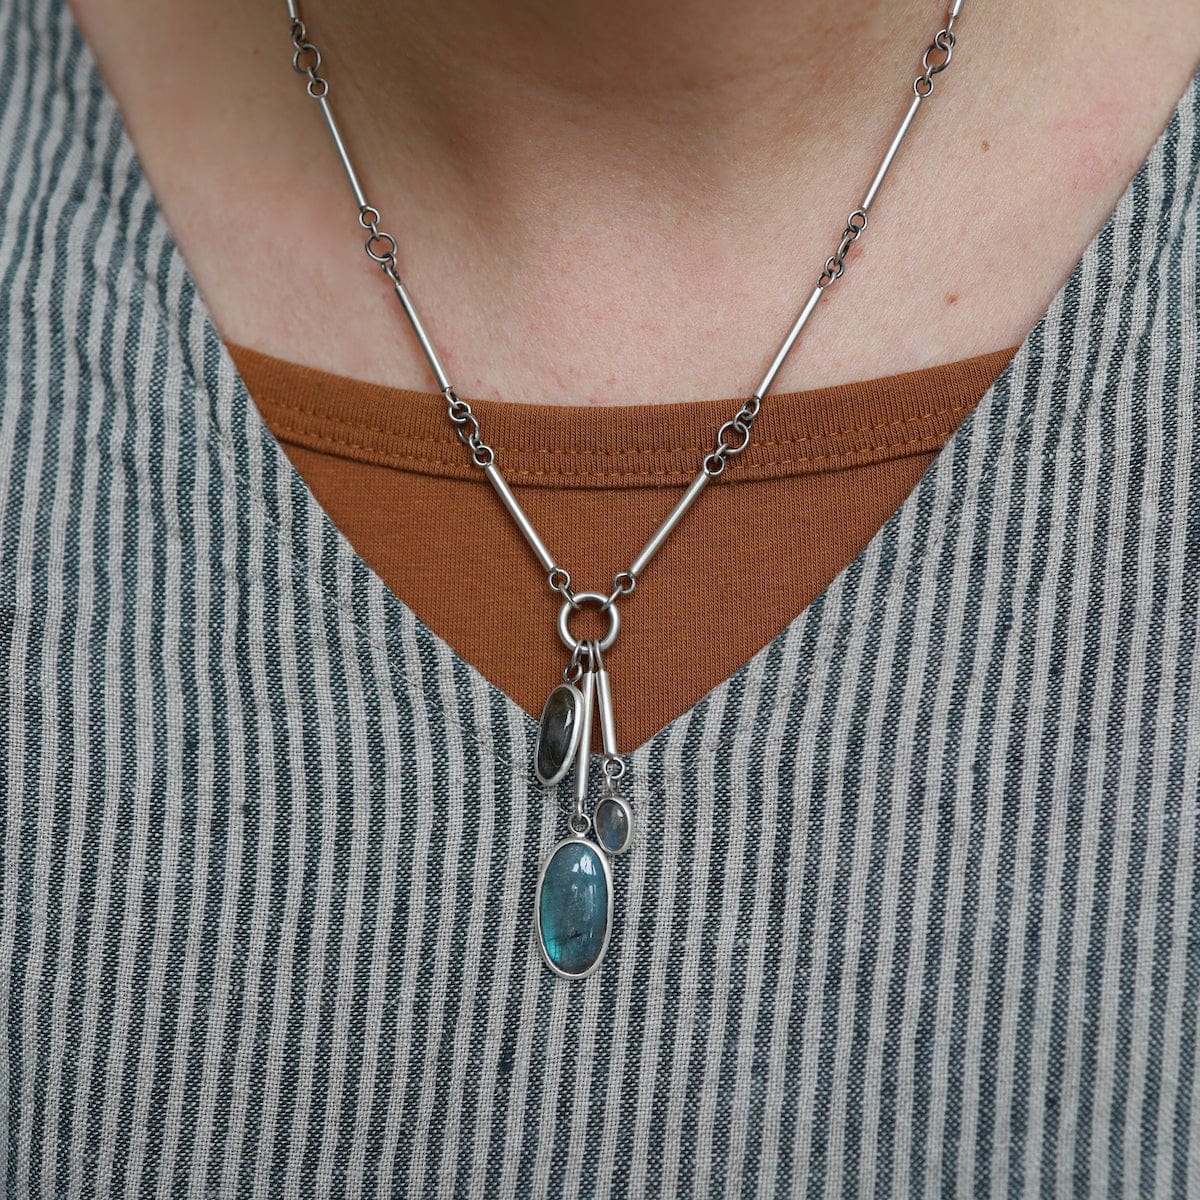 NKL Labradorite Bar Chain With Stone Charms Necklace